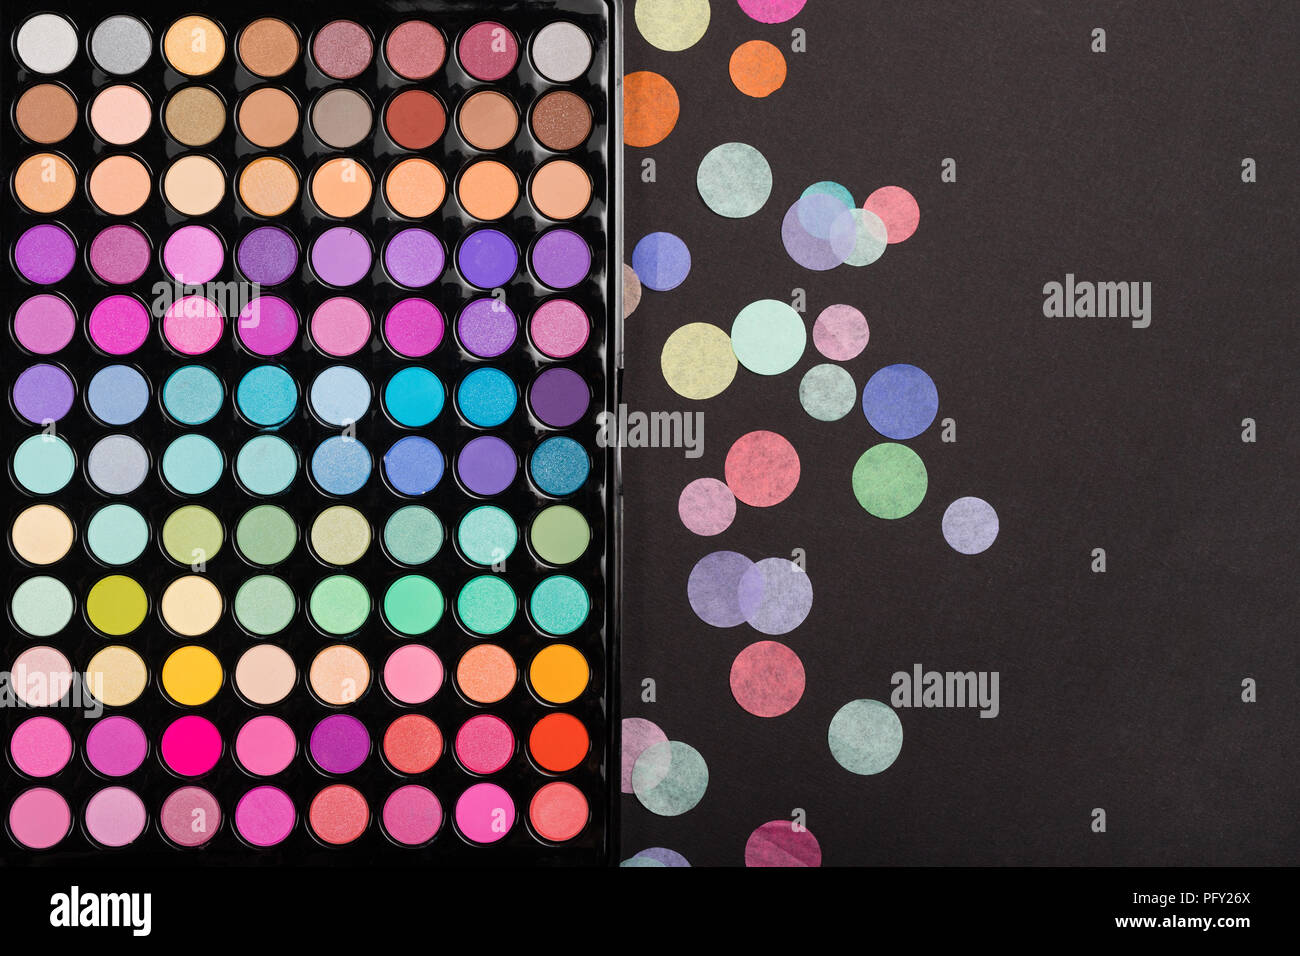 Closeup of makeup eyeshadow palette with confetti on black Stock Photo